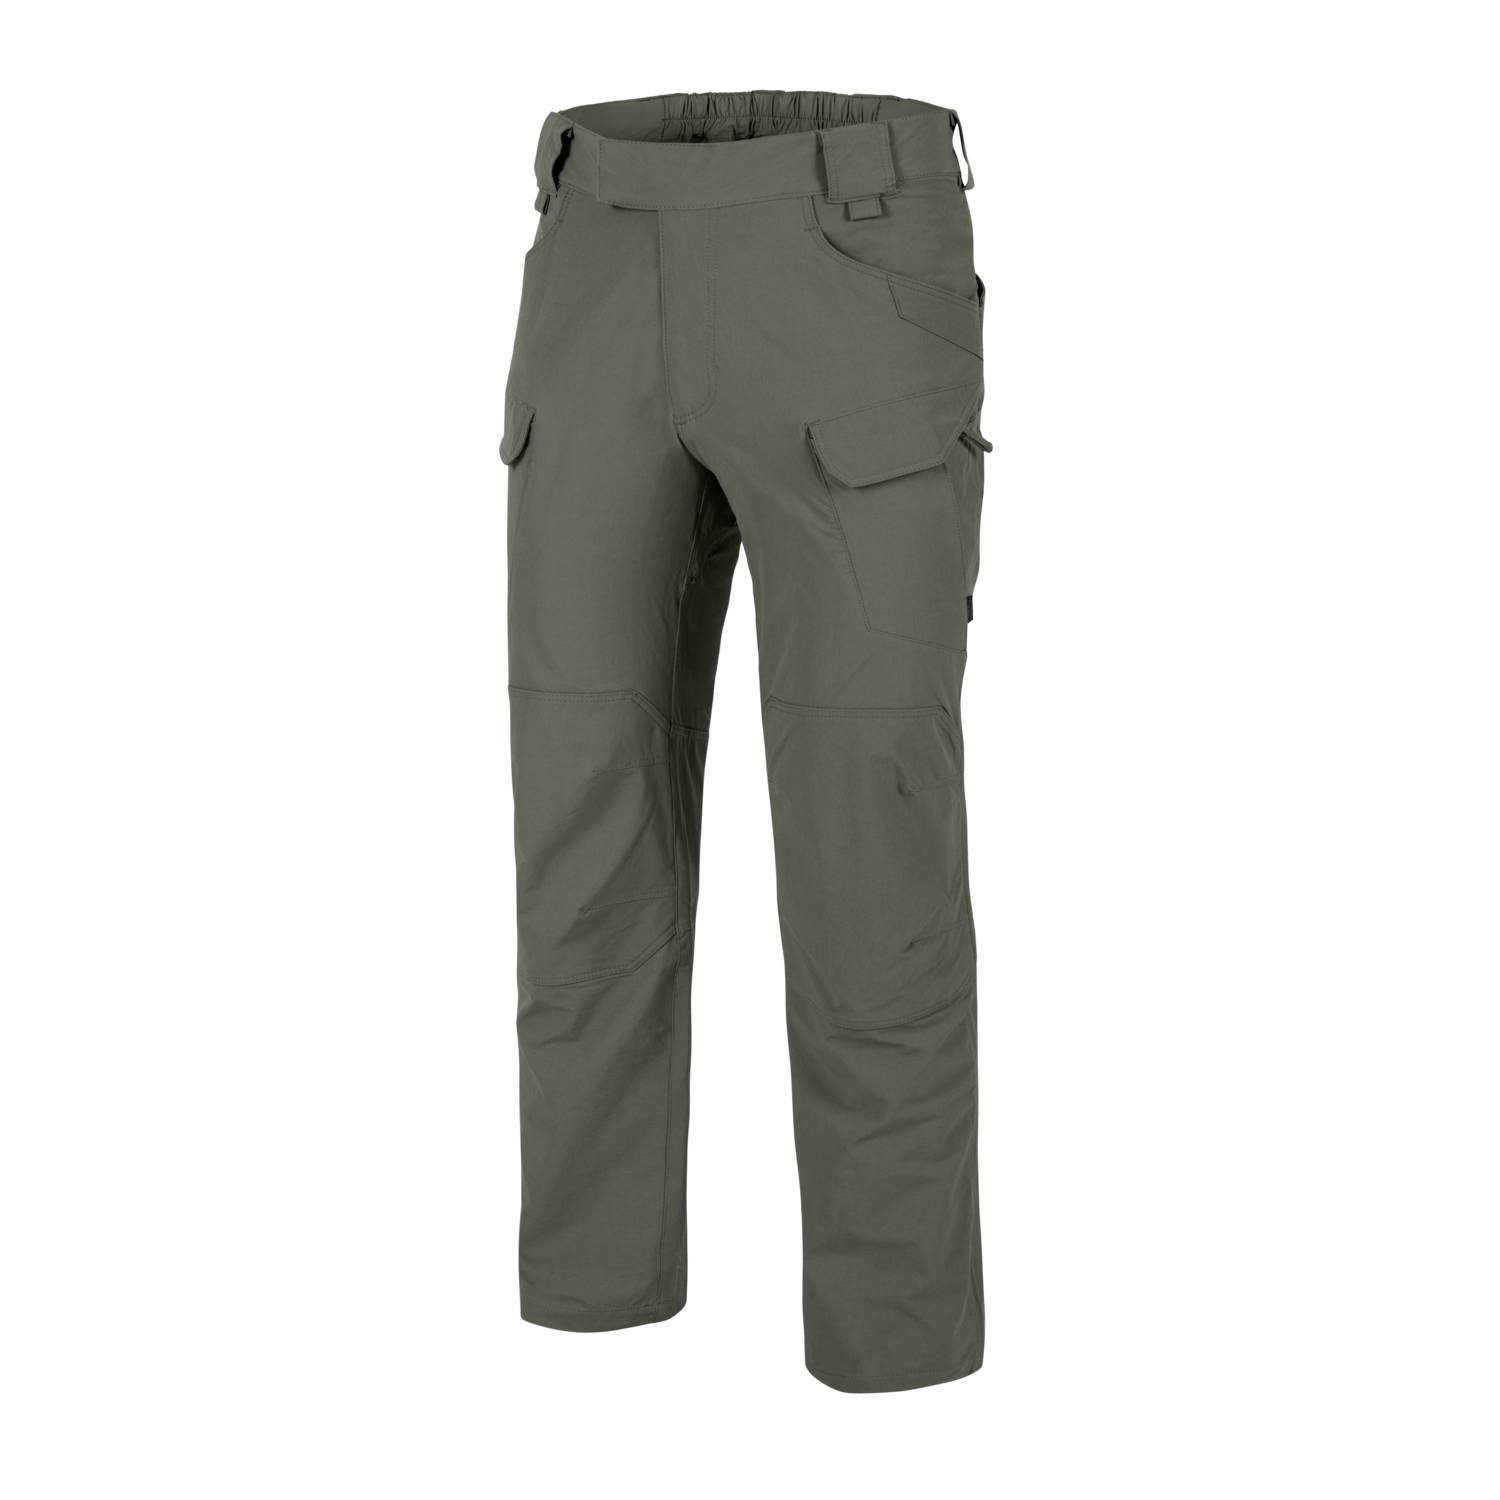 Kalhoty OUTDOOR TACTICAL LITE® TAIGA GREEN Velikost: 4XL-R